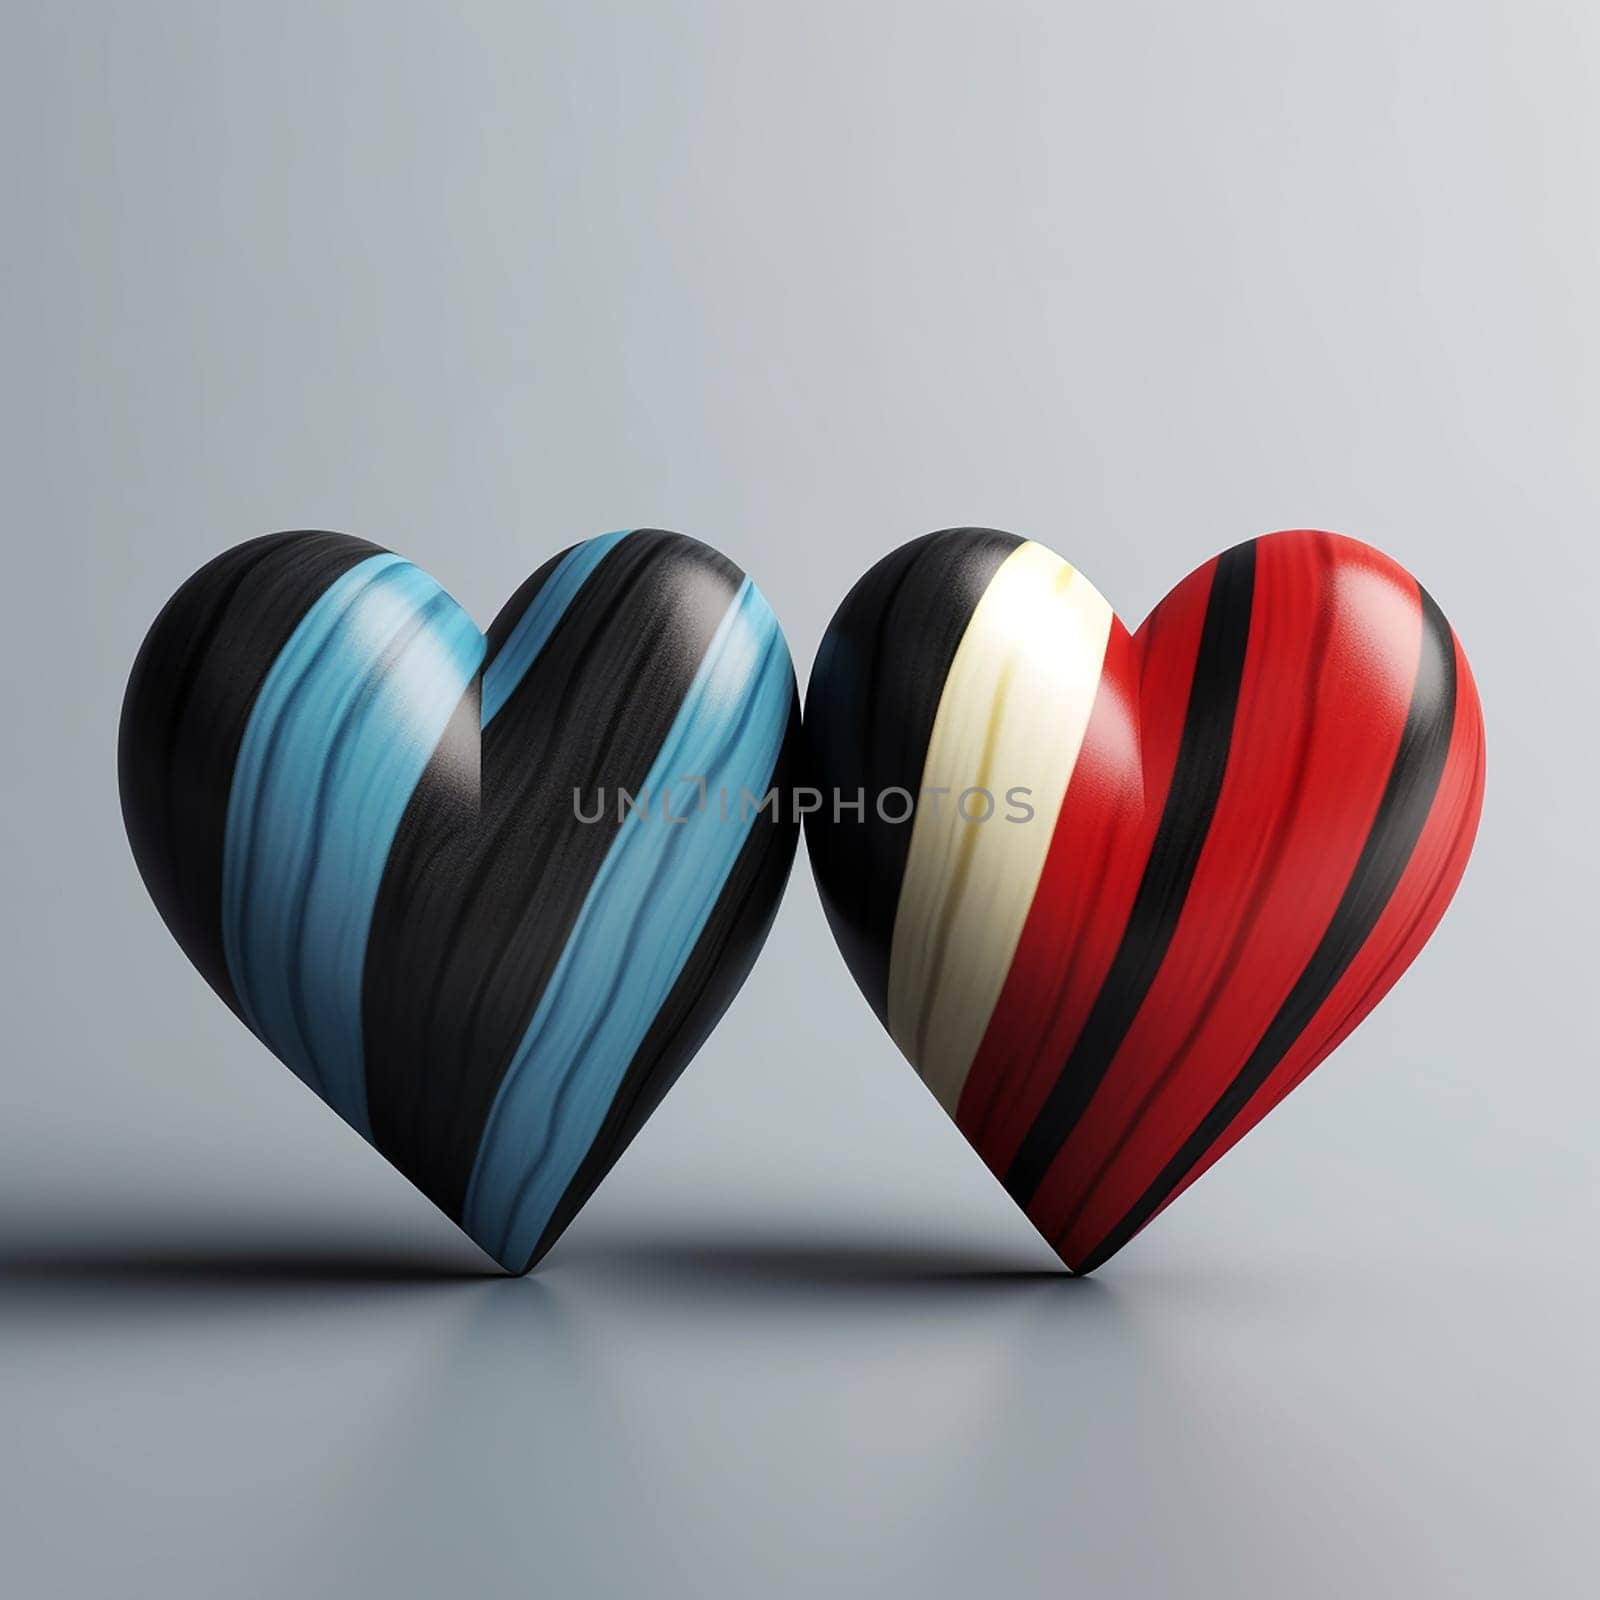 Two heart-shaped objects with contrasting striped patterns. by Hype2art